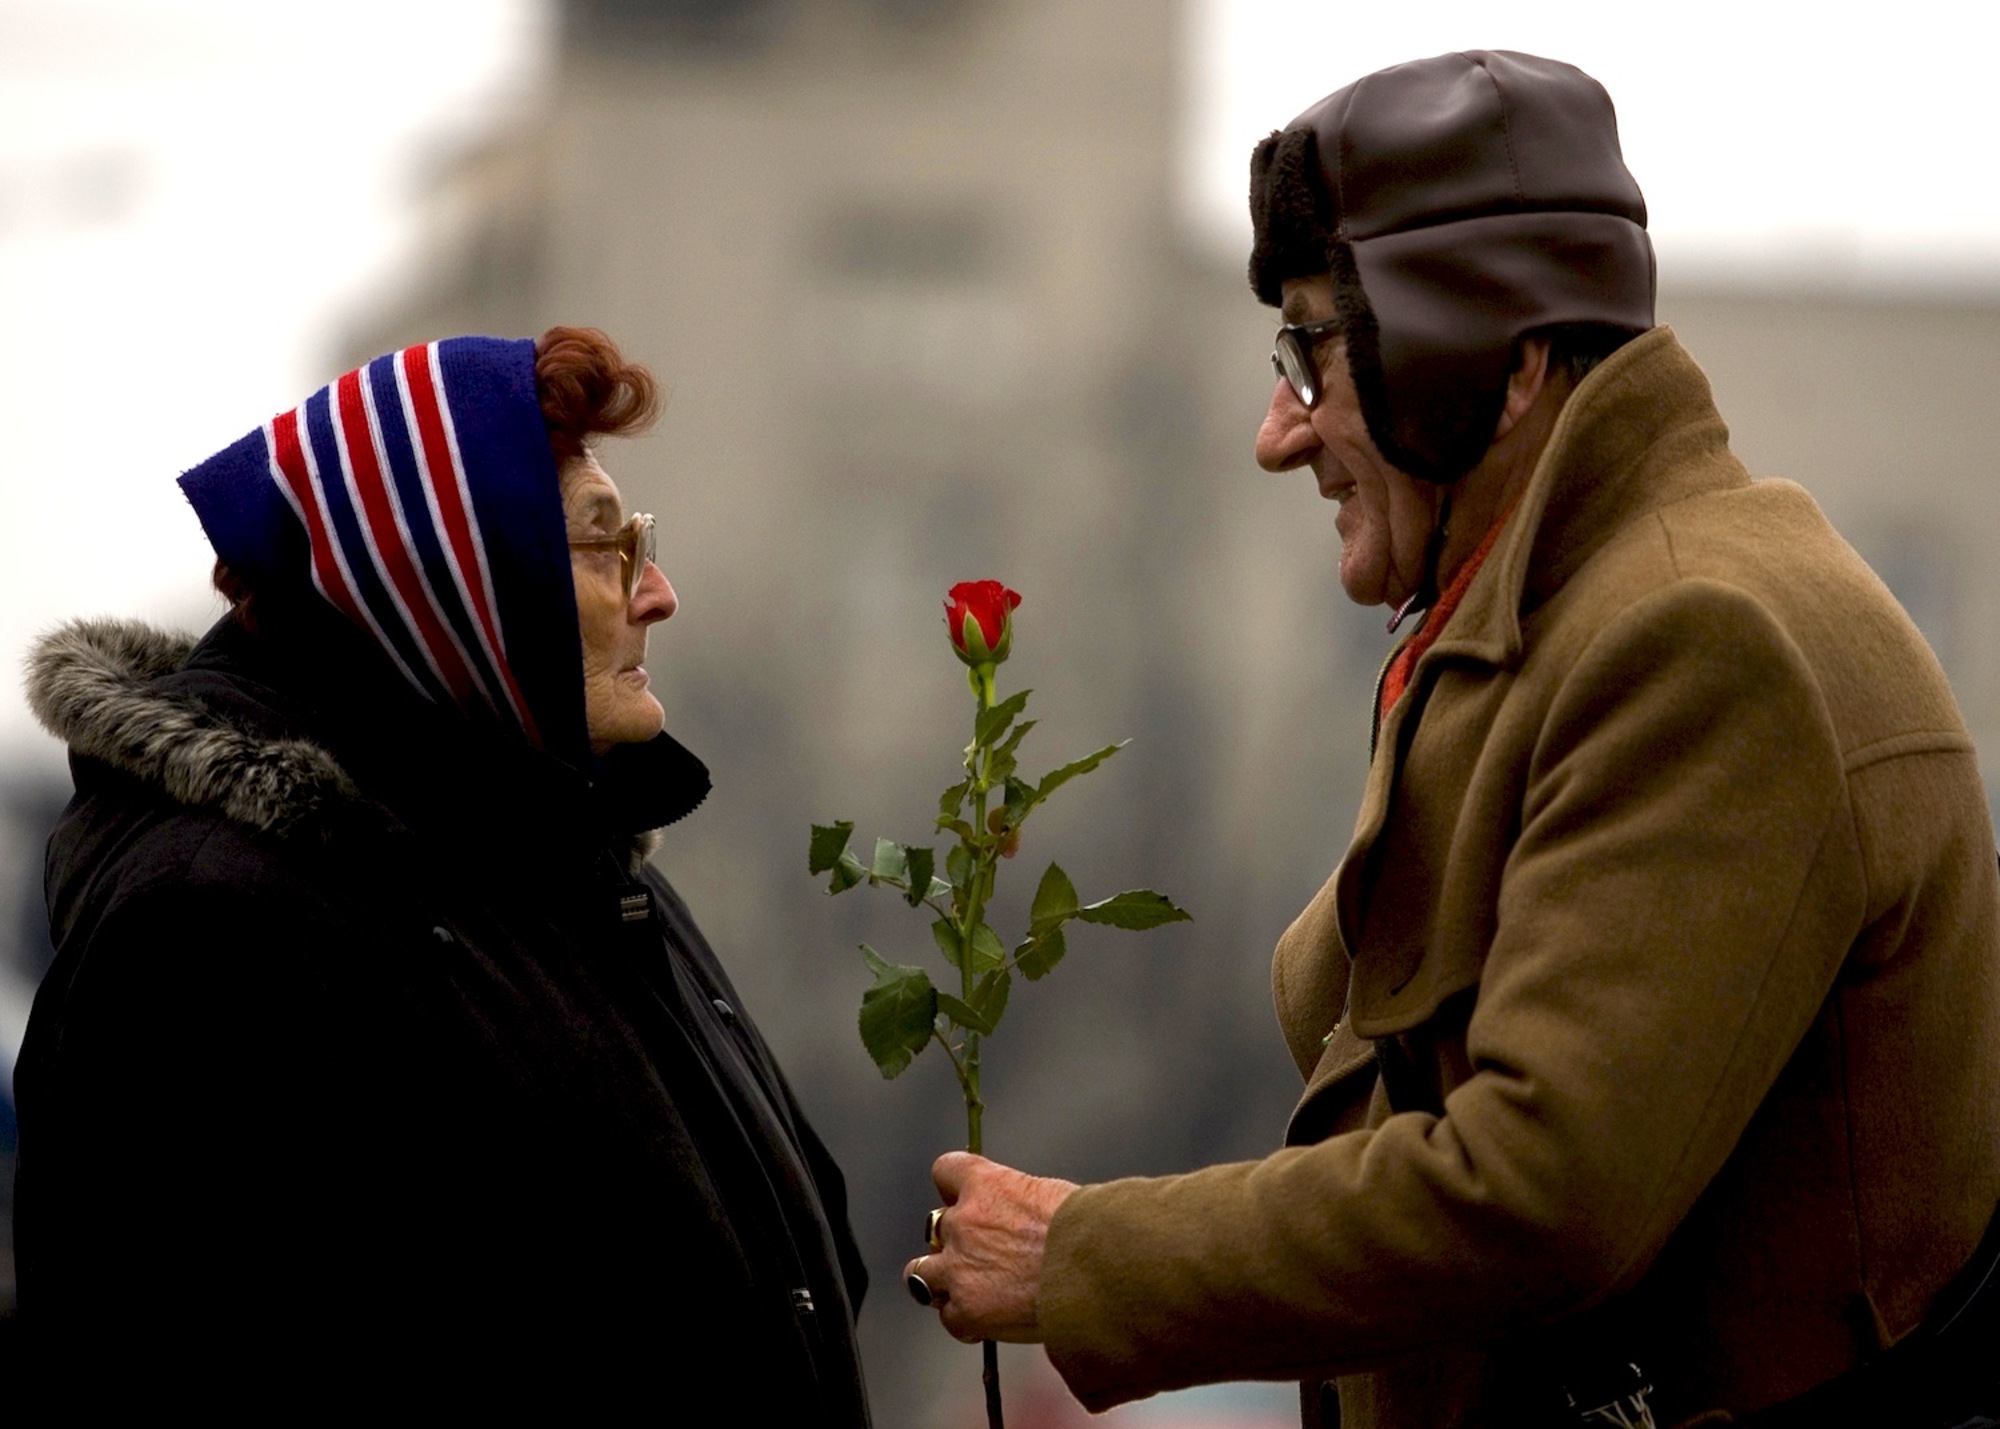 10+ Pictures Of True Love And Affection That Will Melt Our Hearts